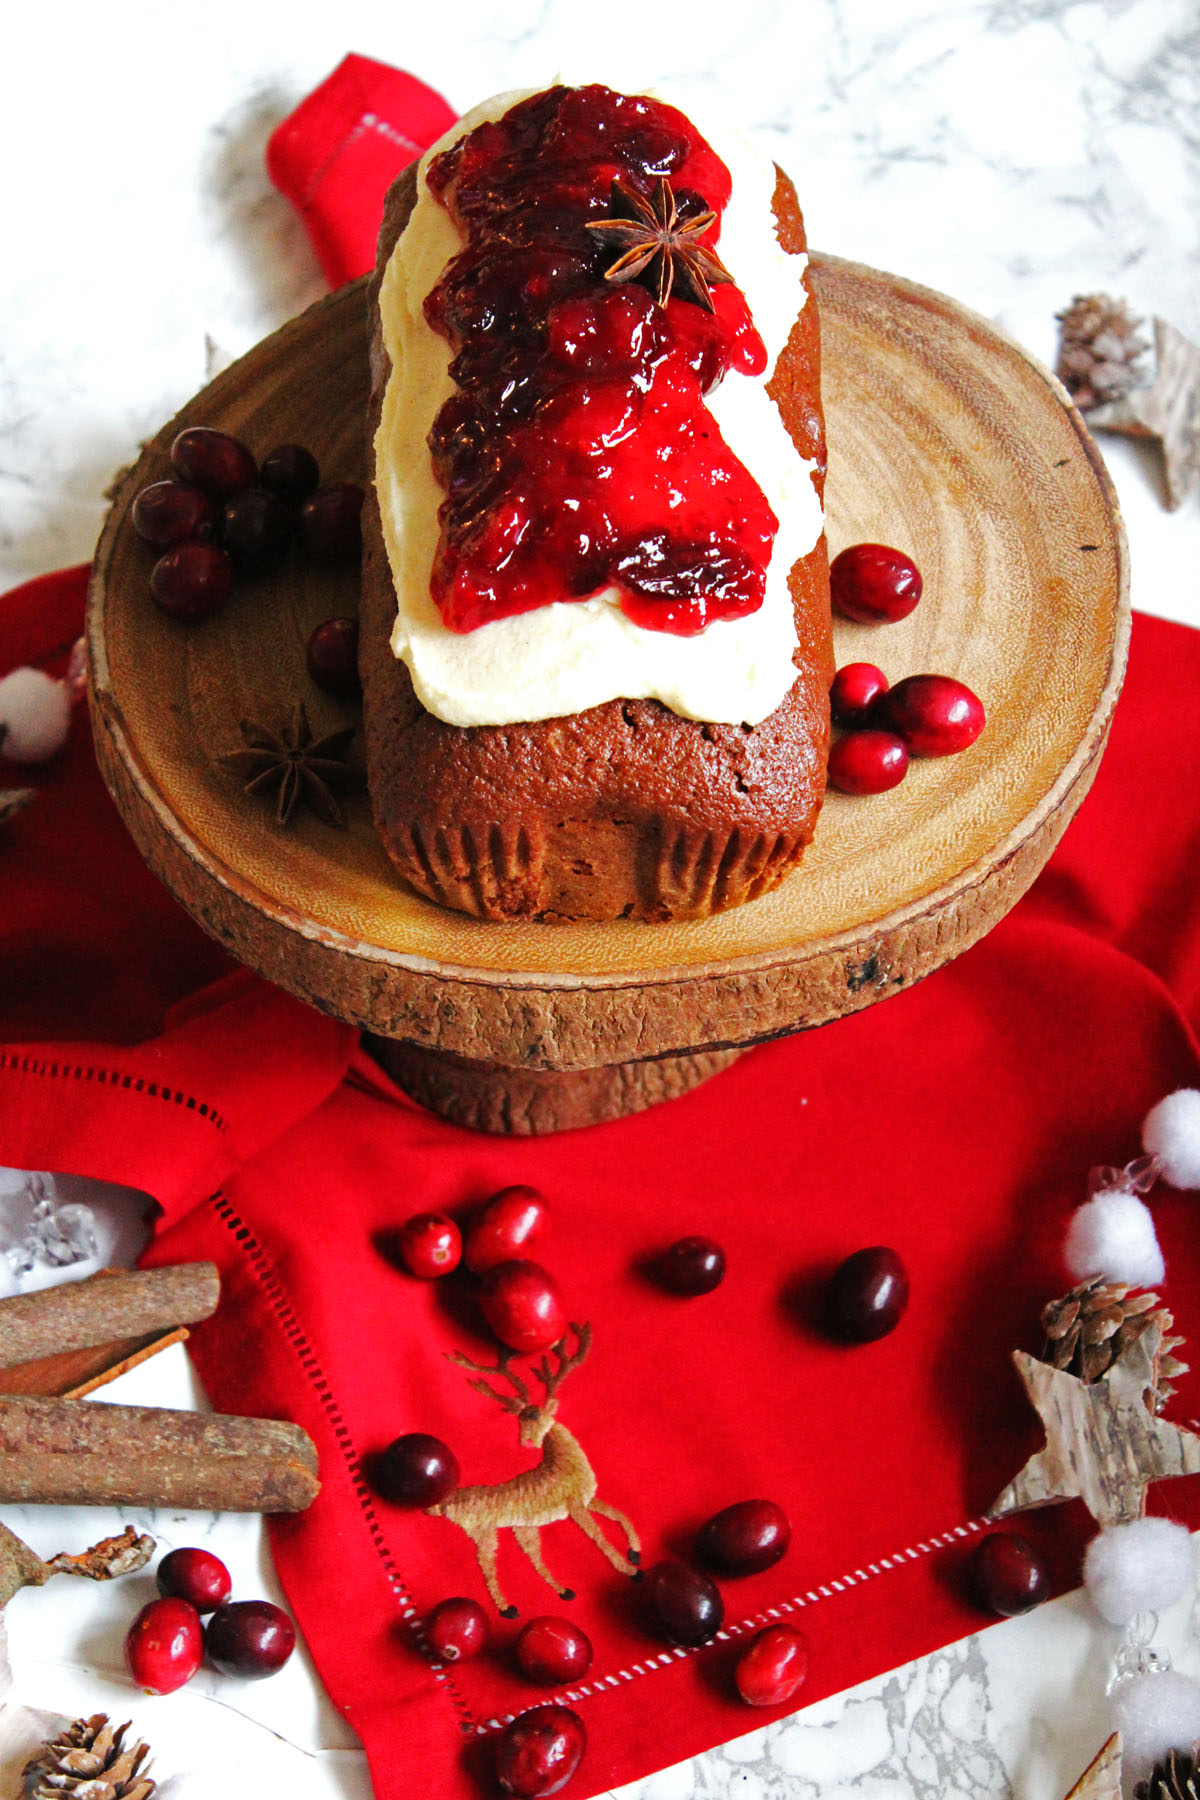 This Cinnamon Loaf Cake is topped with Cream Cheese Frosting and a Mulled Cranberry Compote. It's the perfect afternoon treat for the cold winter months. Why not serve with a hot cup of coffee on a frosty afternoon. Get the recipe for this simple loaf cake at Supper in the Suburbs